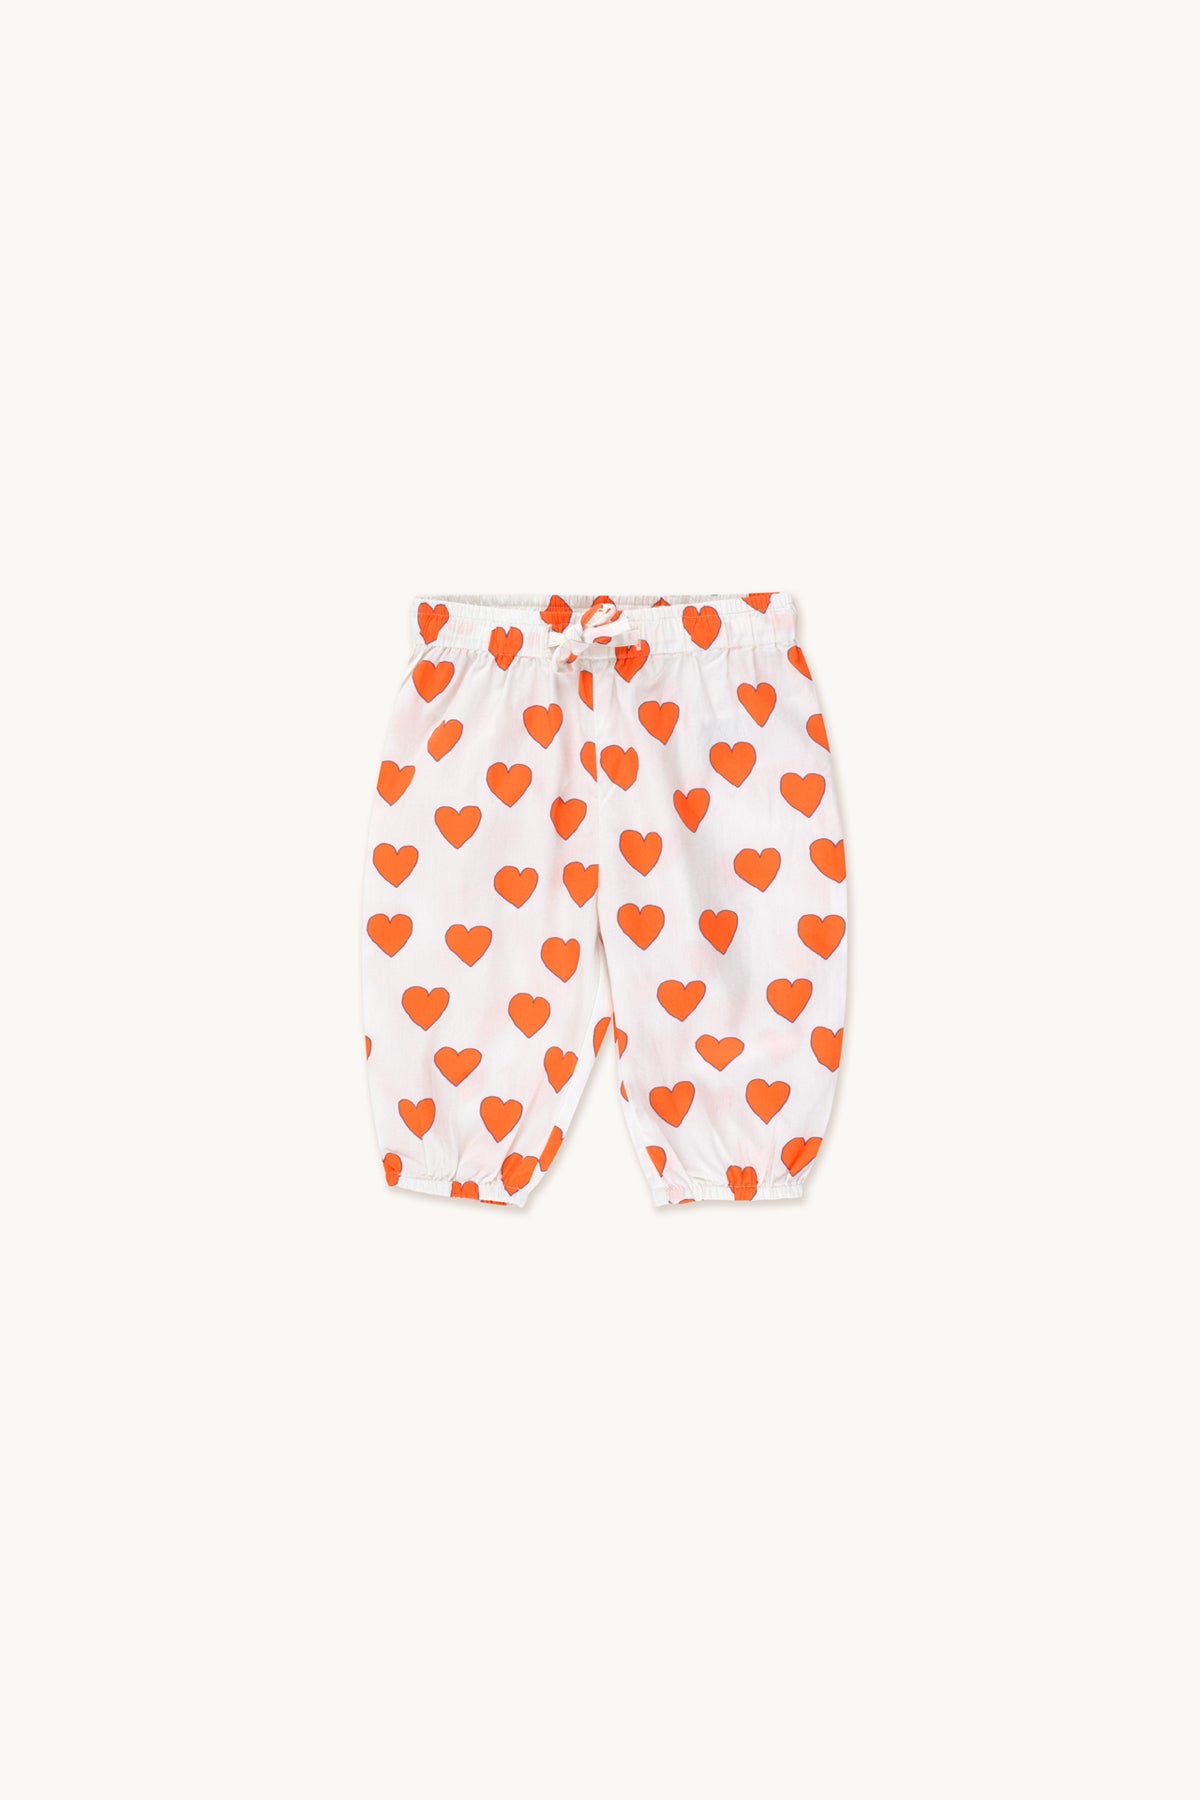 Tiny Cottons - baby pants - hearts - off white